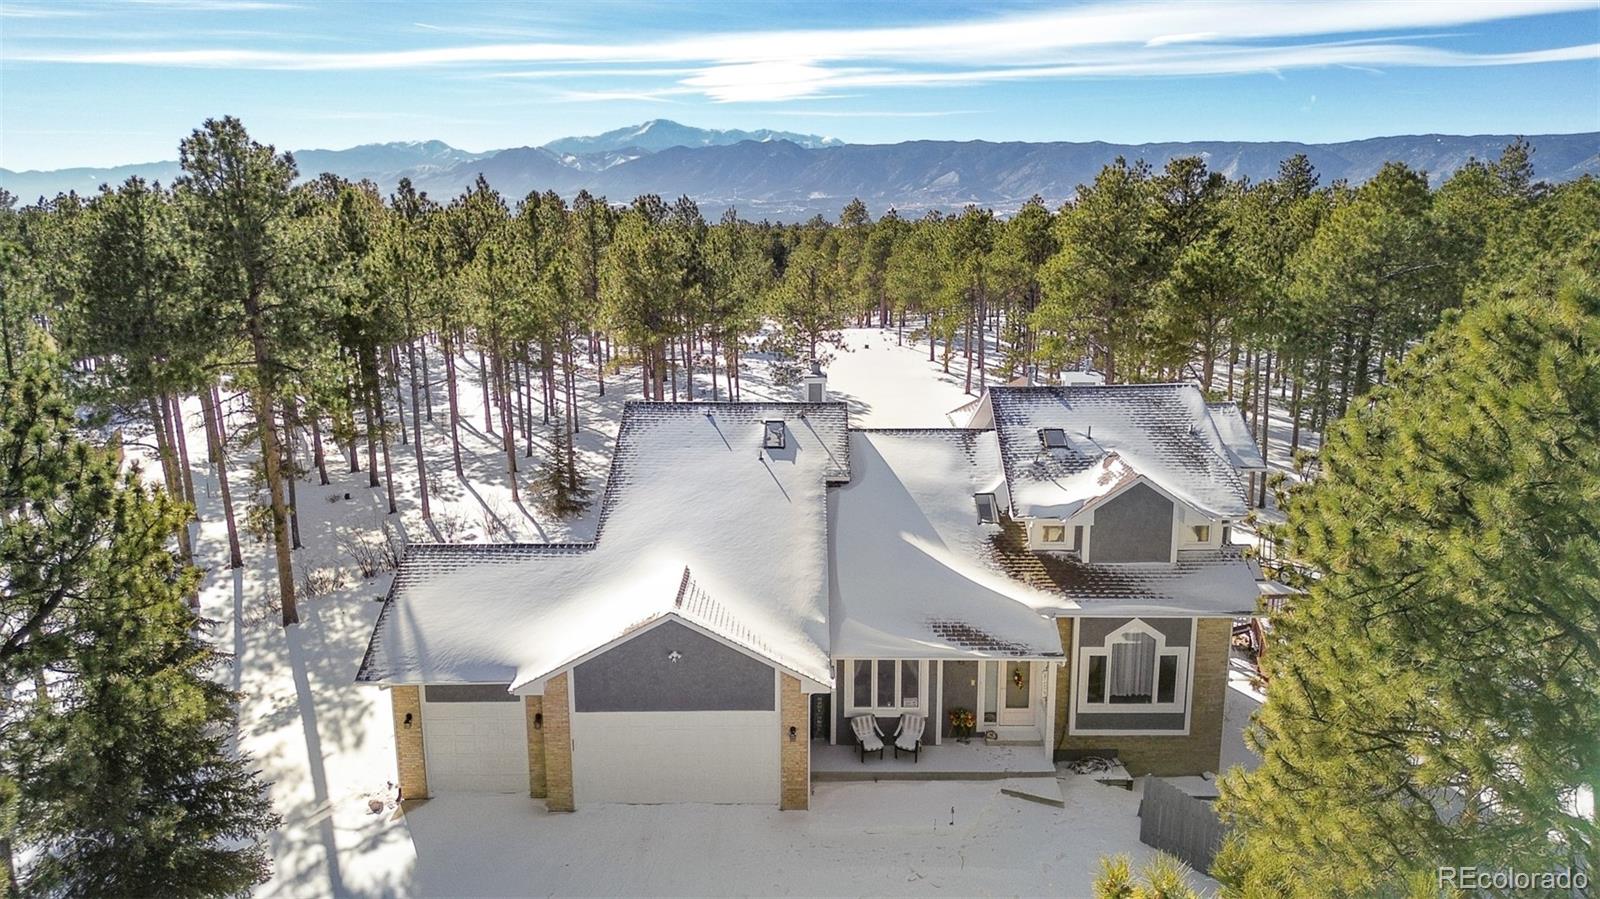 Report Image for 17750  Merryhill Court,Monument, Colorado